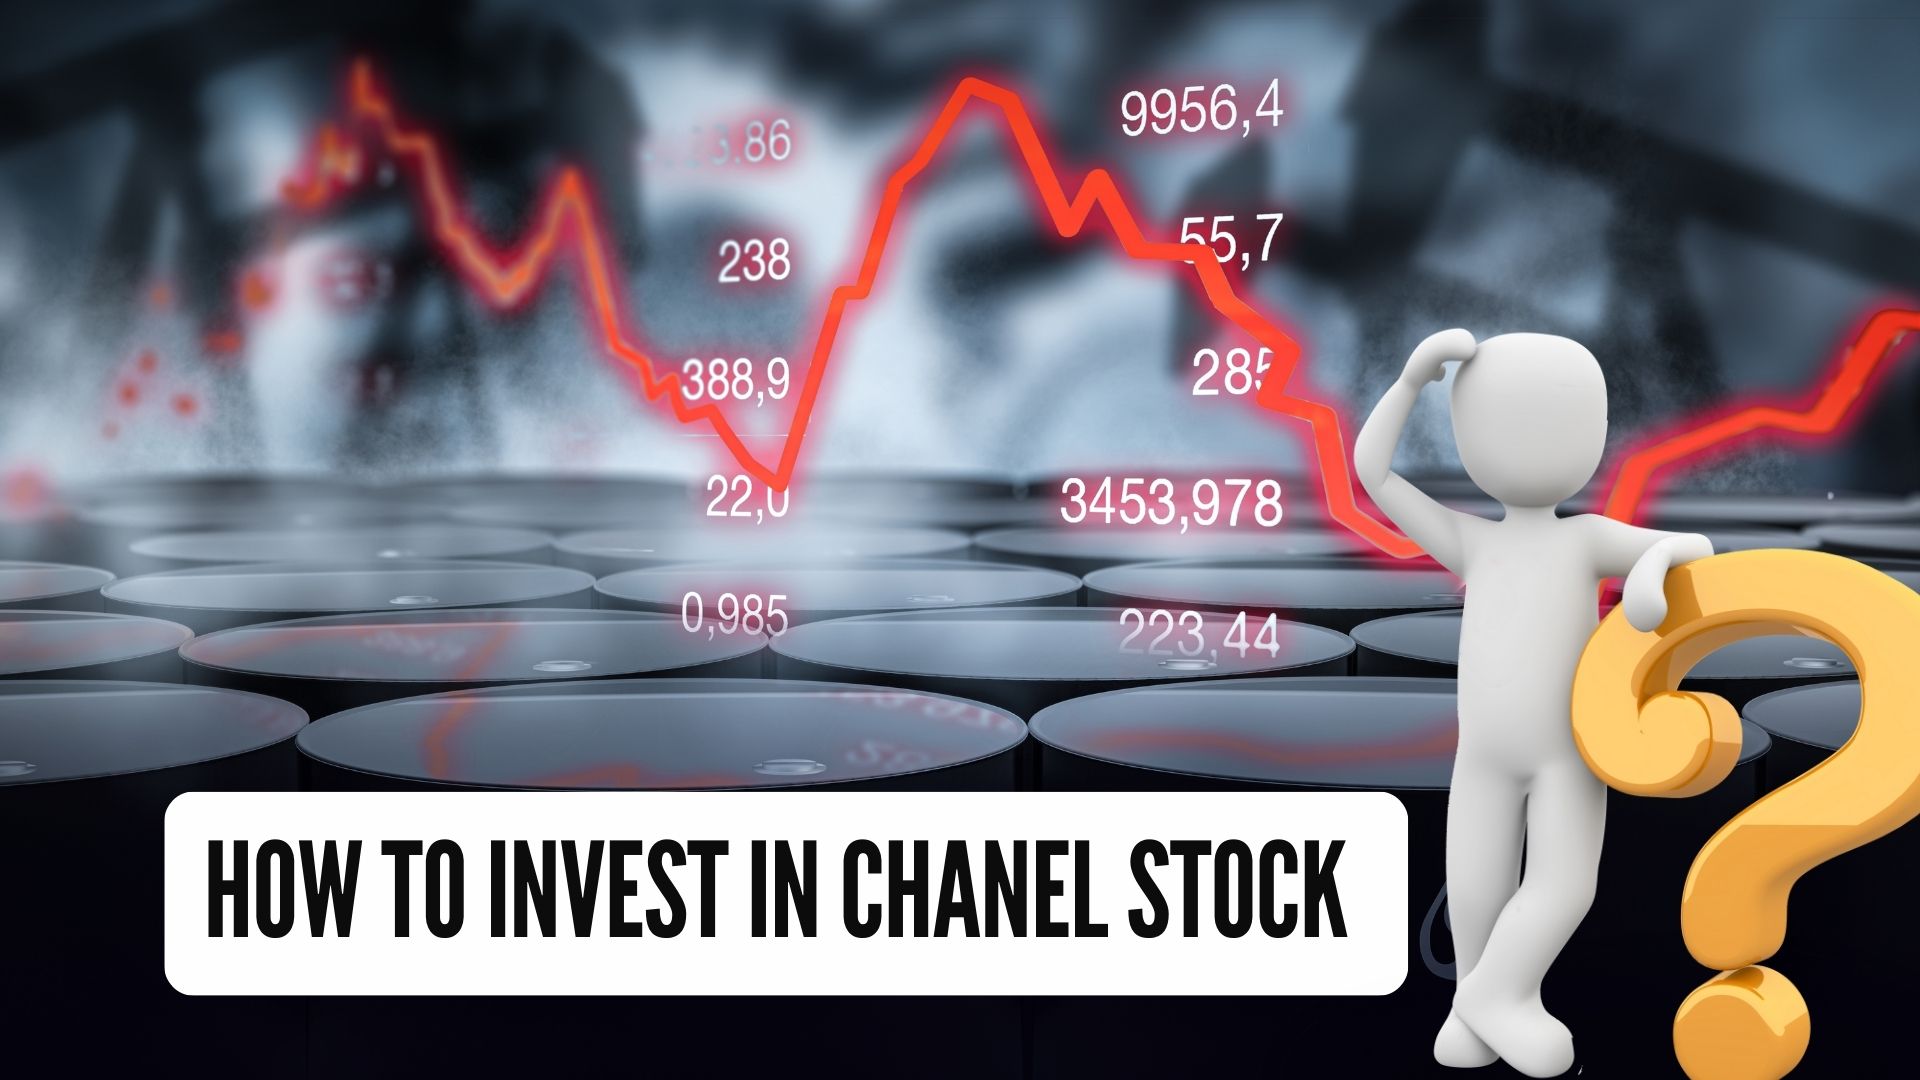 How to Invest in Chanel Stock